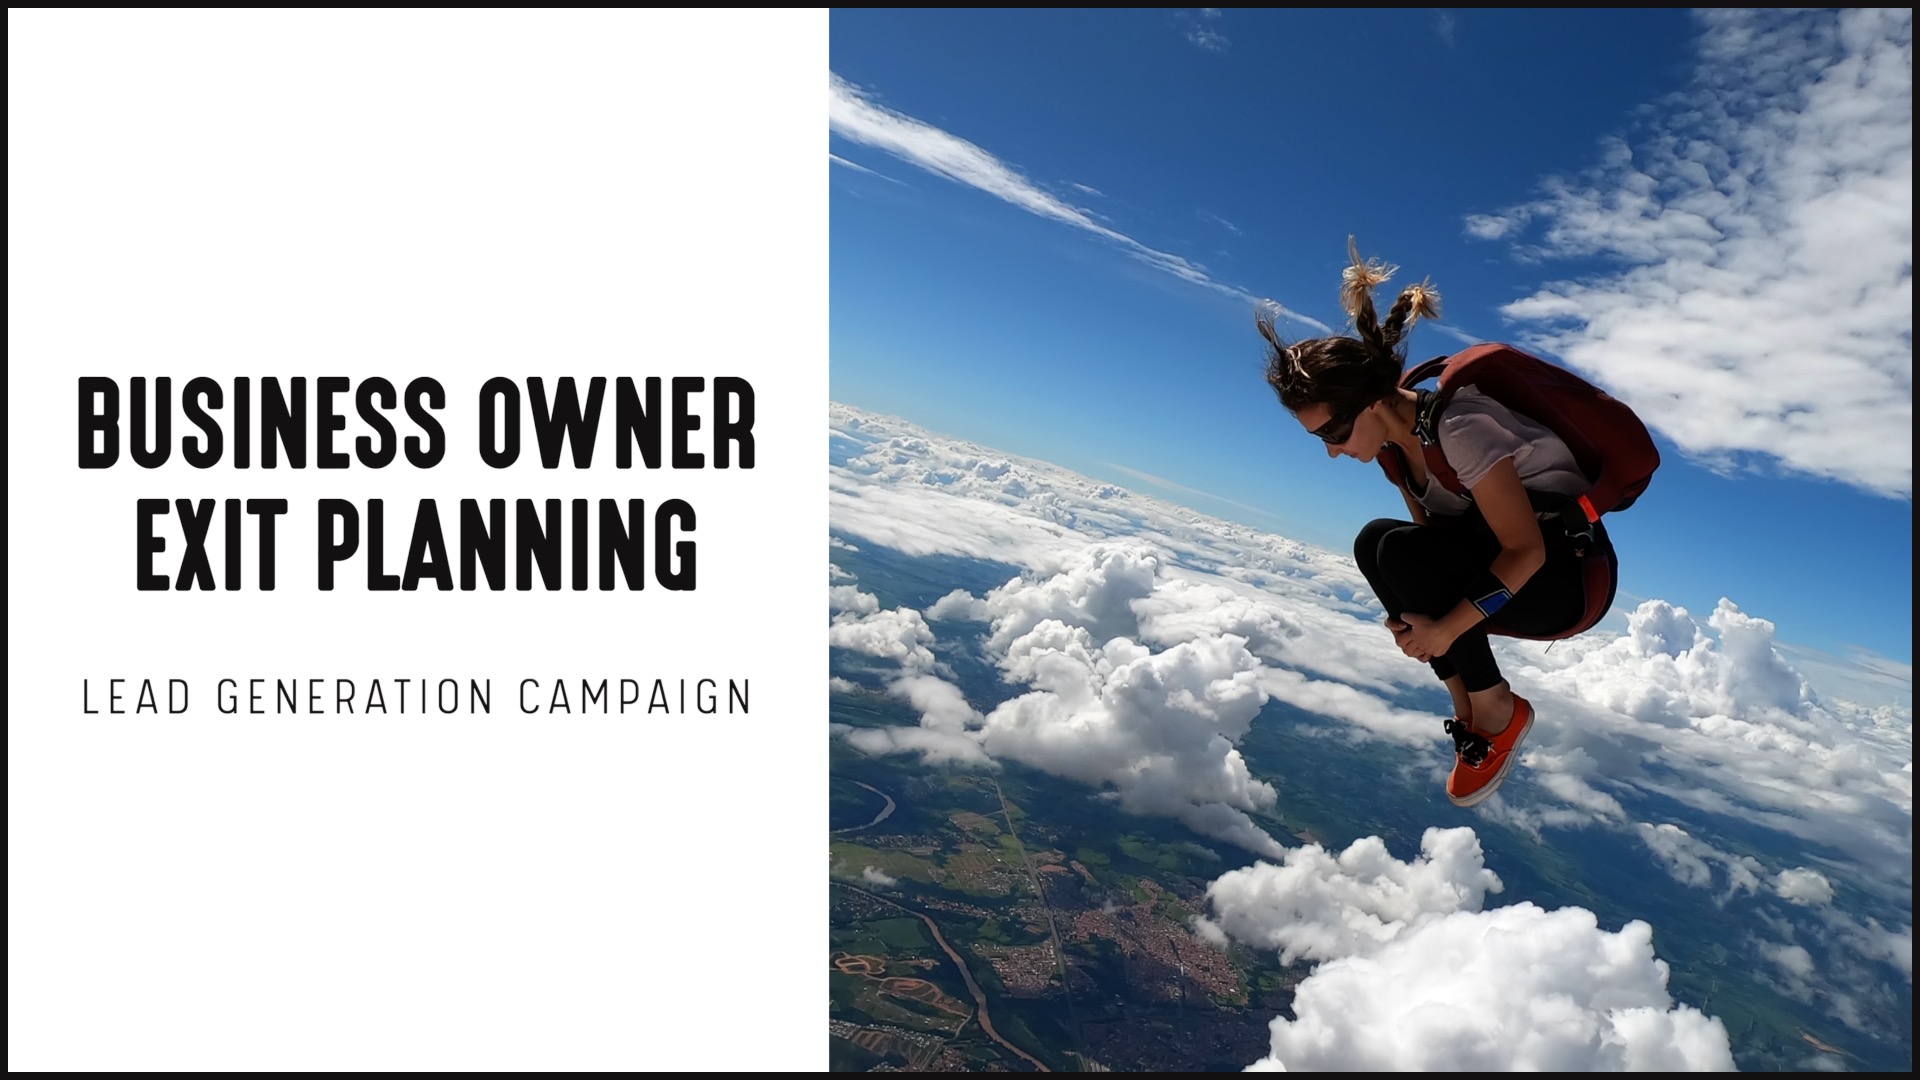 [NEW] Lead Gen Campaign | Business Owner Exit Planning